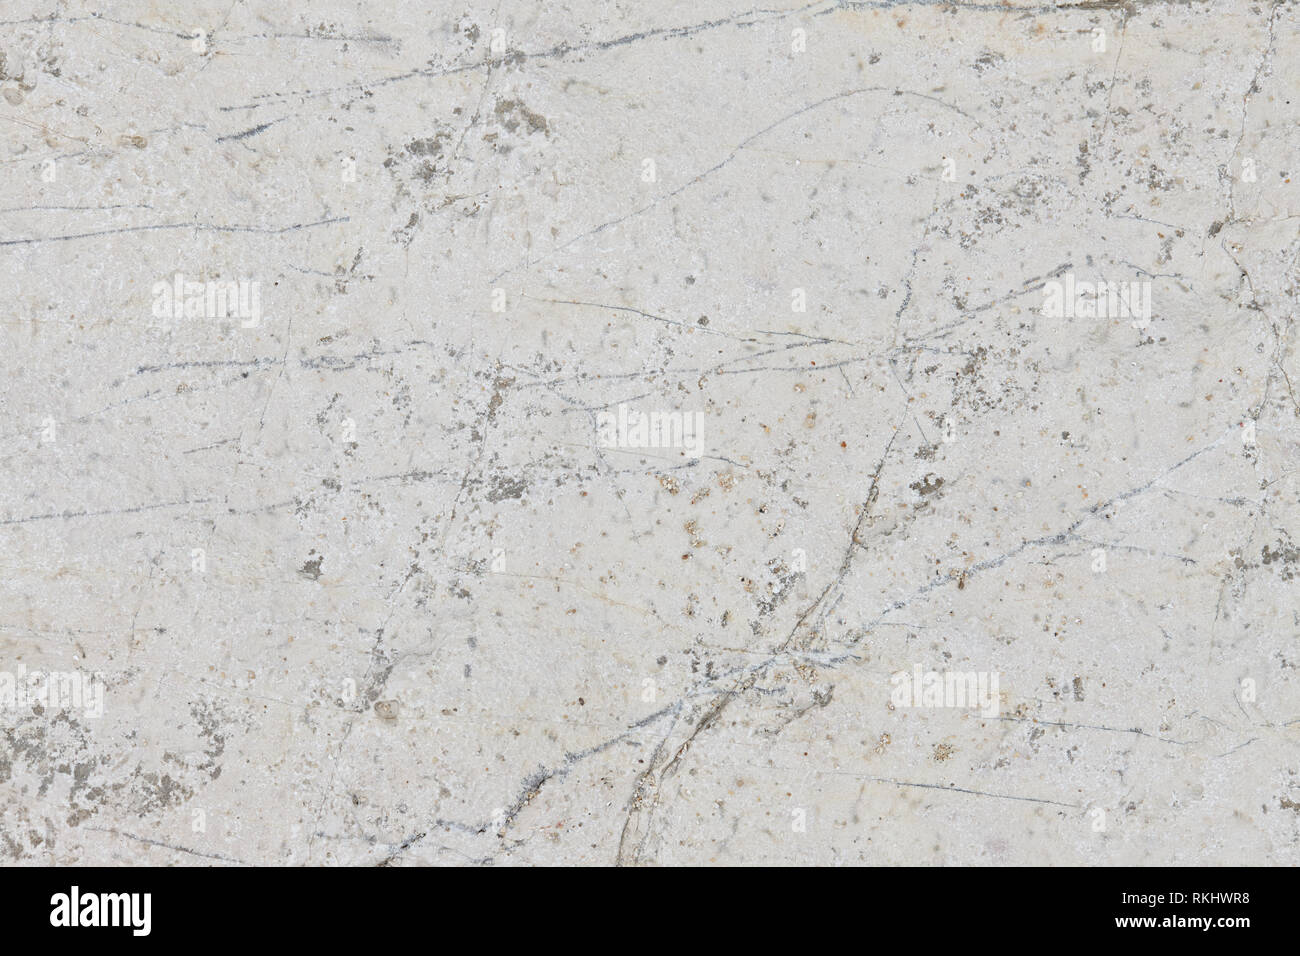 Stone background texture close up view Stock Photo - Alamy